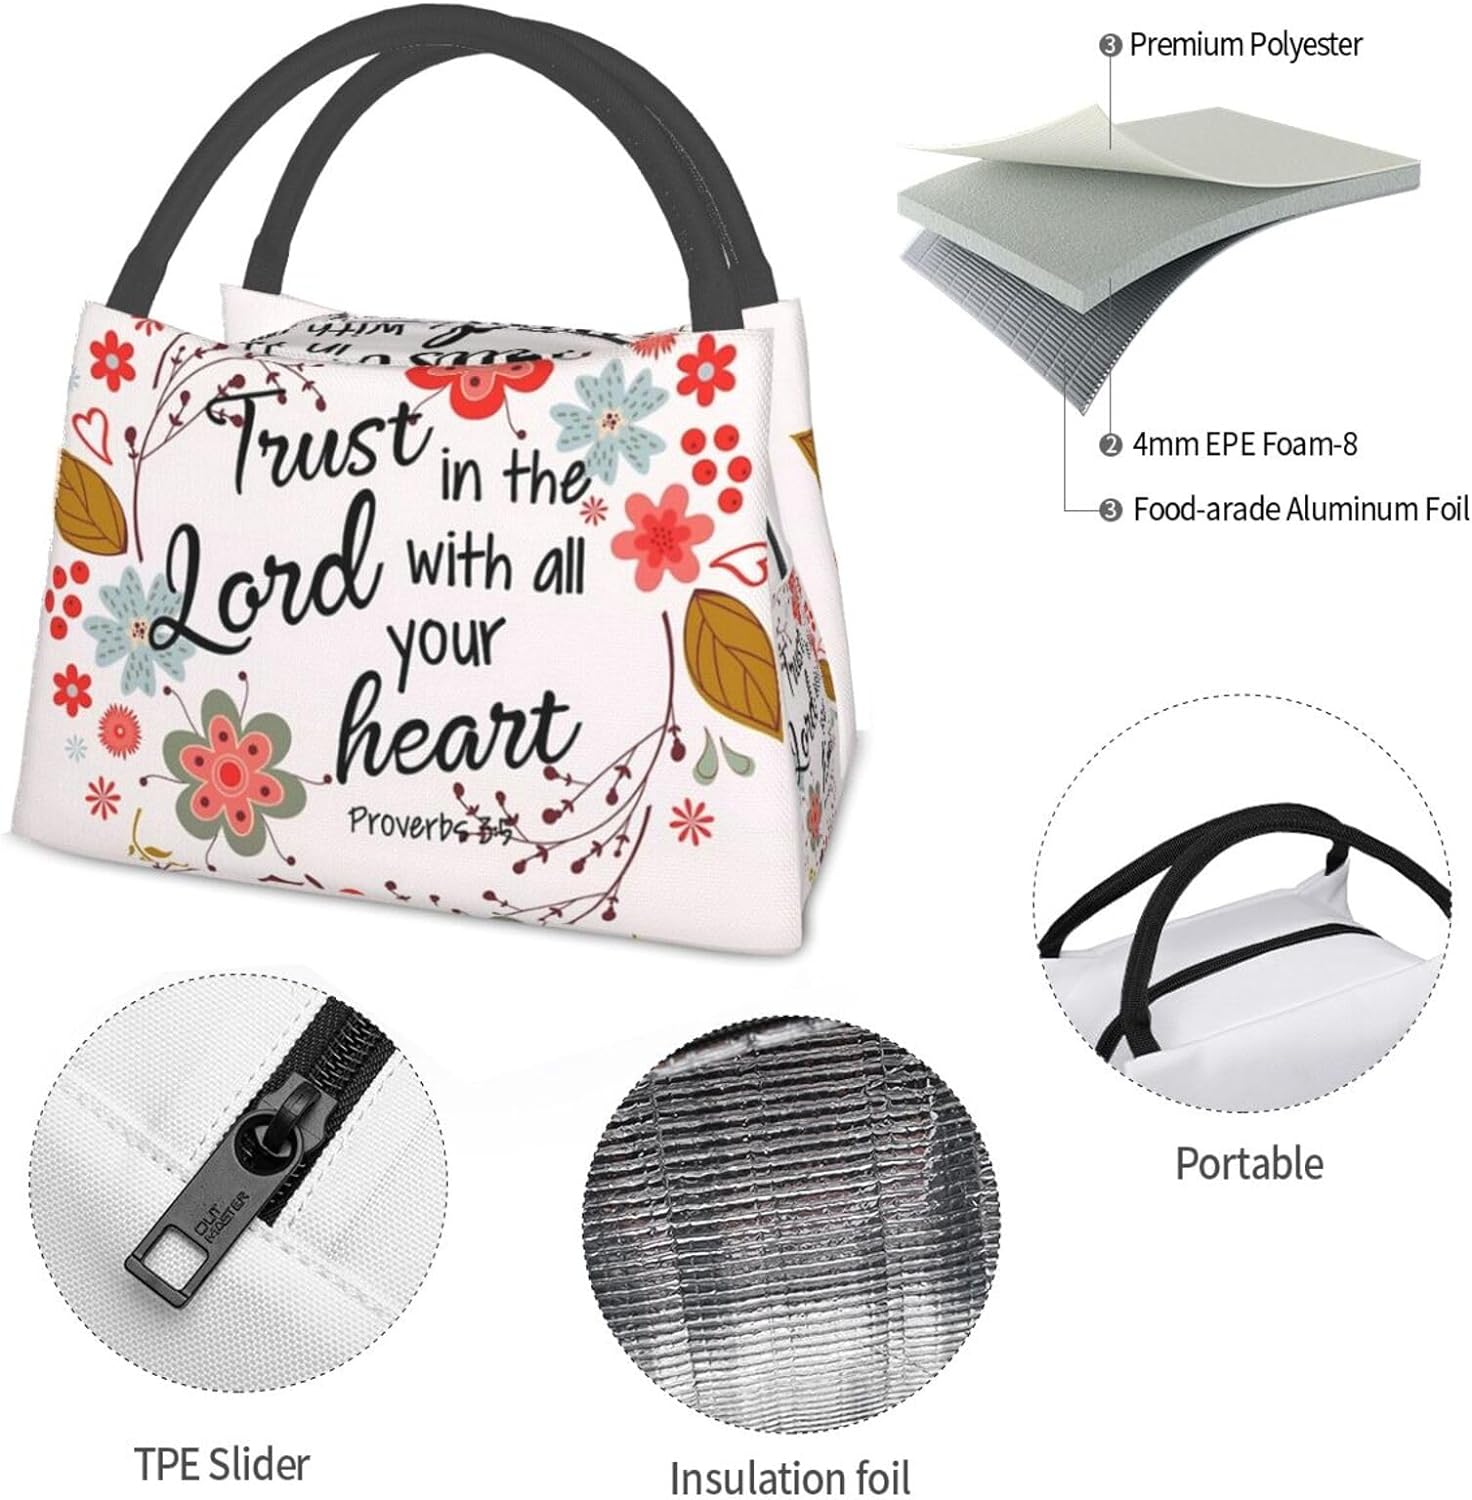 Trust In The Lord With All Your Heart Christian Lunch Bag claimedbygoddesigns